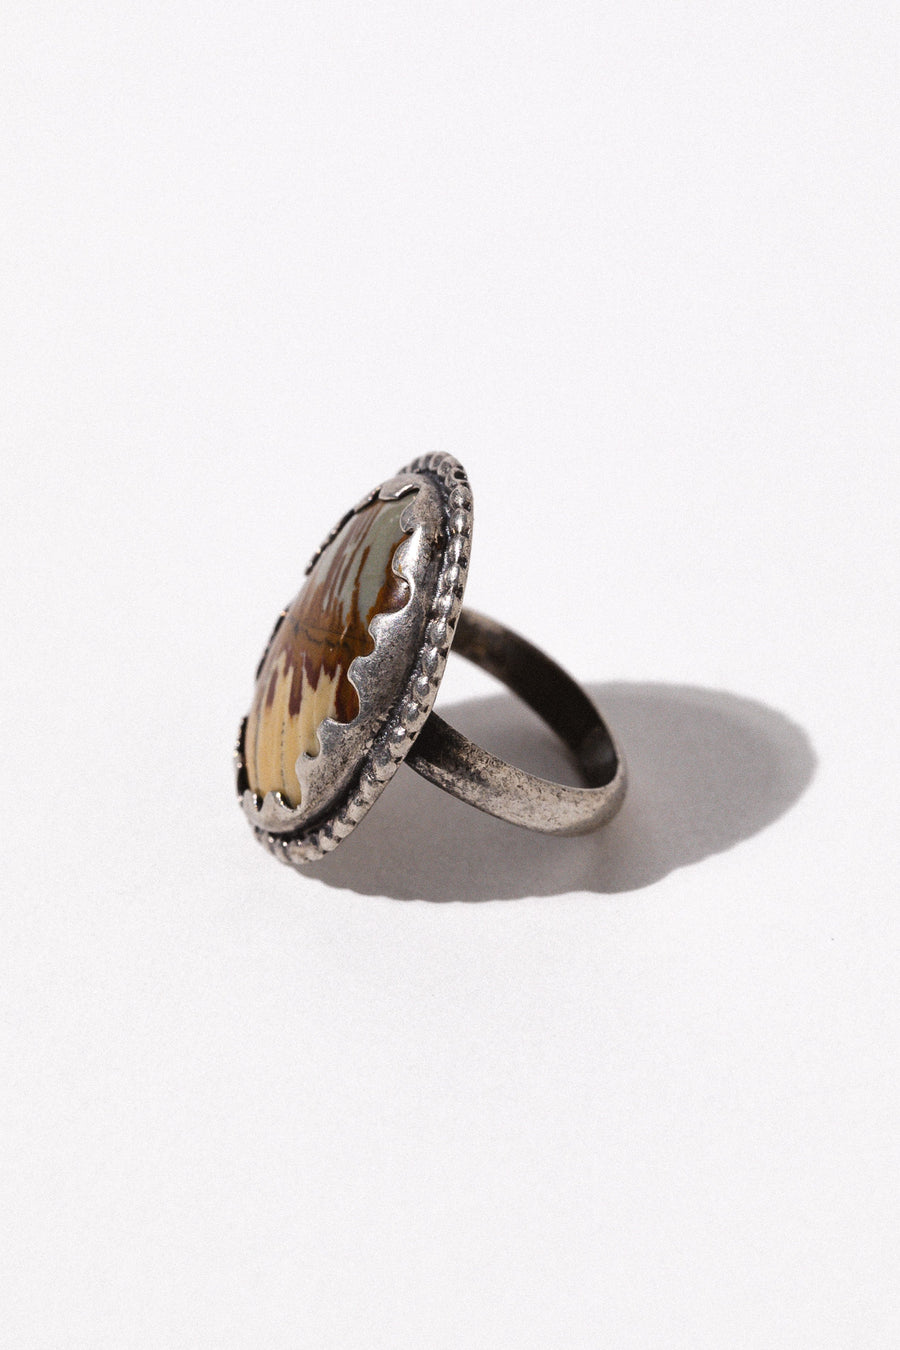 Vintage Native American Jewelry Sterling Silver / US 11 Copy of Cheyenne Ring